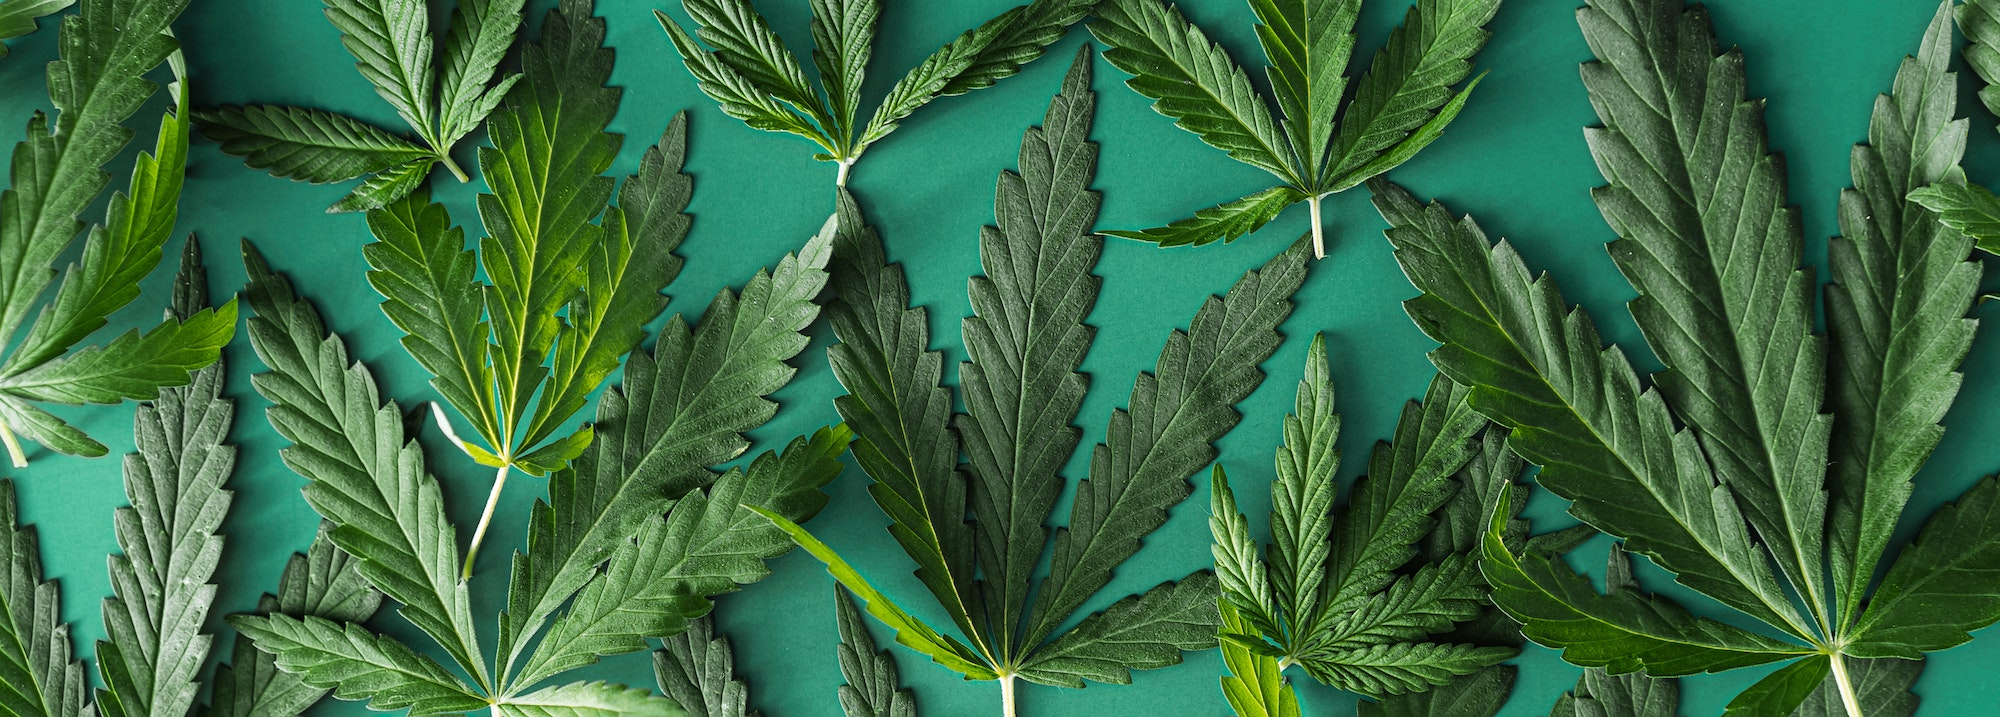 Background of green cannabis leaves, long banner